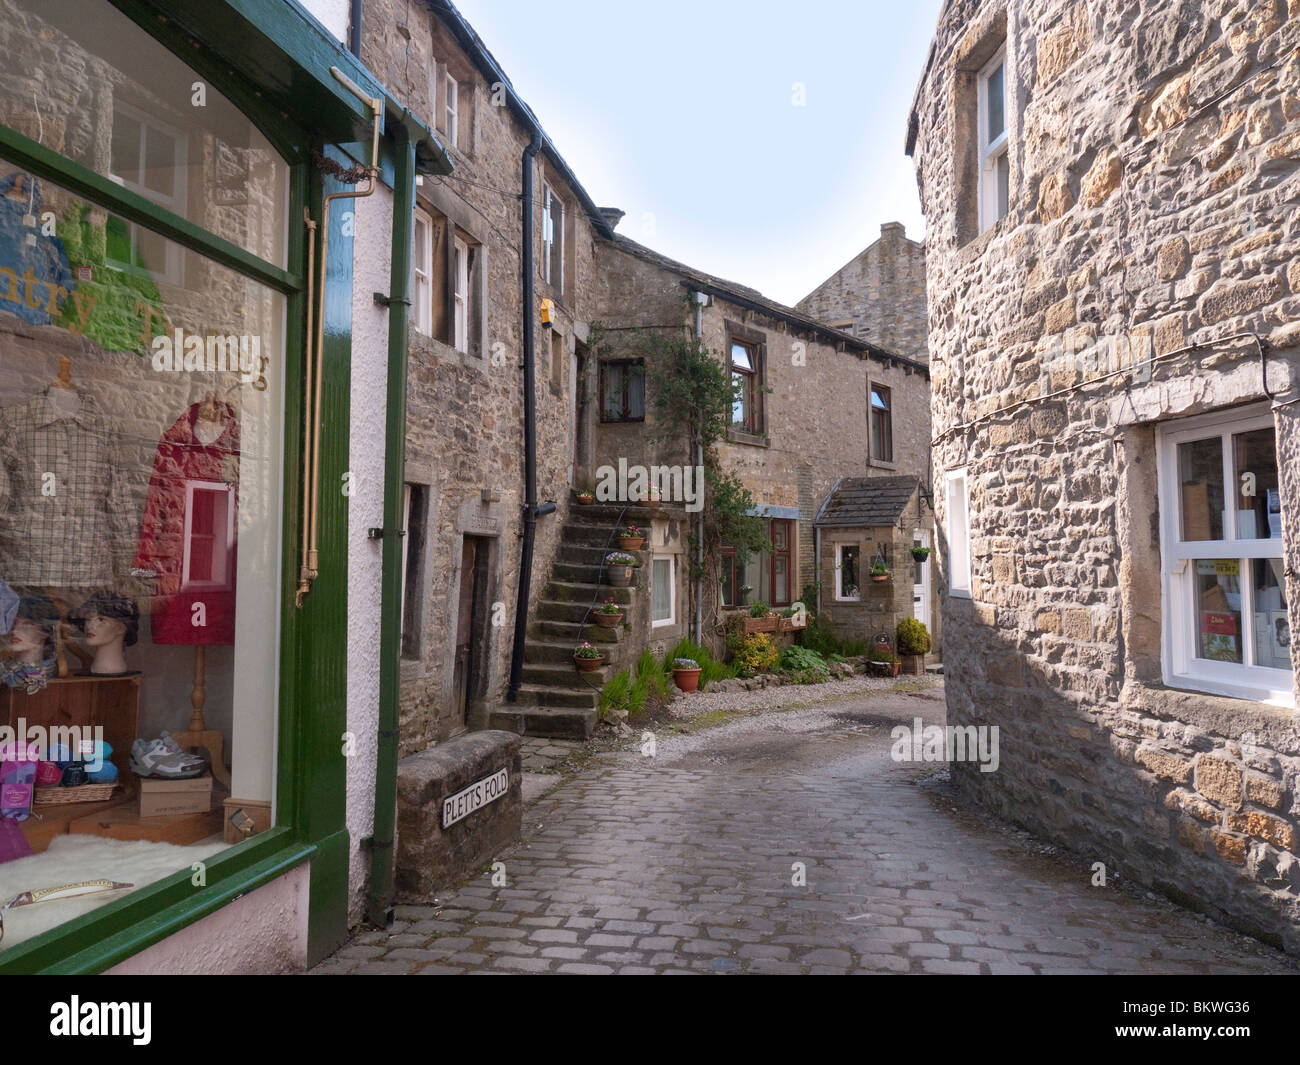 The beautiful town of Grassington in the North Yorkshire Dales in England full of stone cottages and country charm Stock Photo